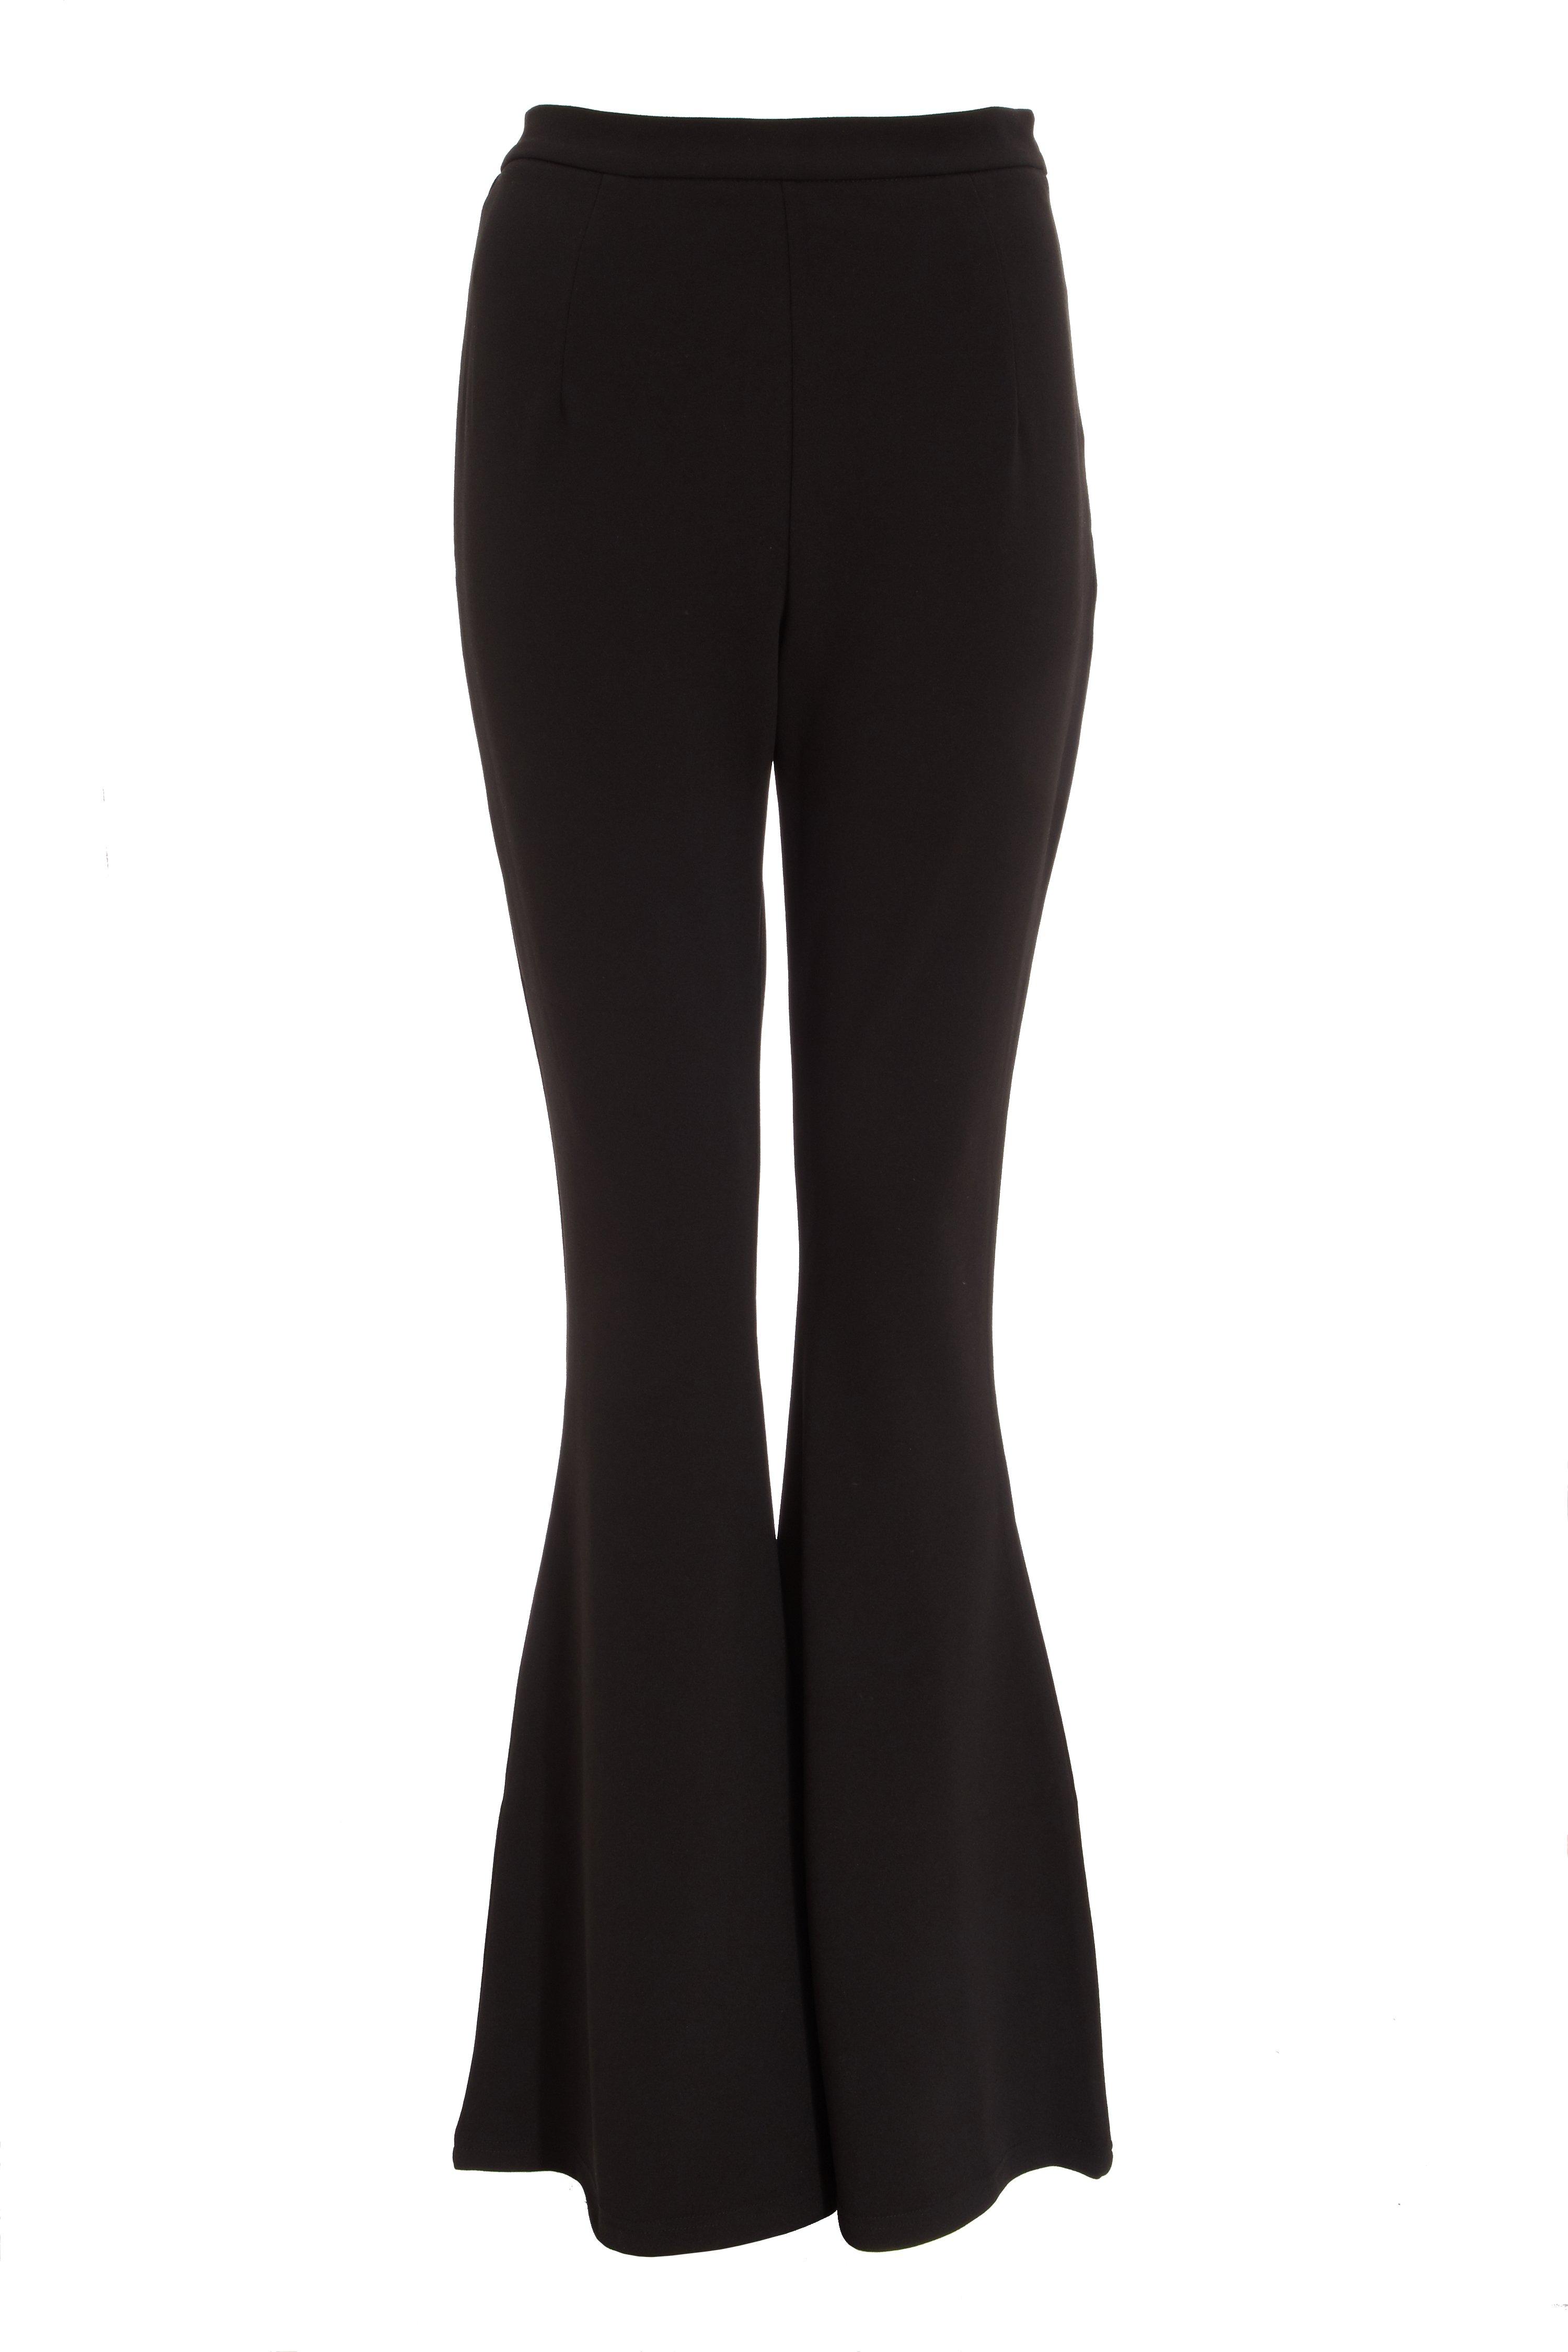 Black High Waist Flare Trousers - Quiz Clothing